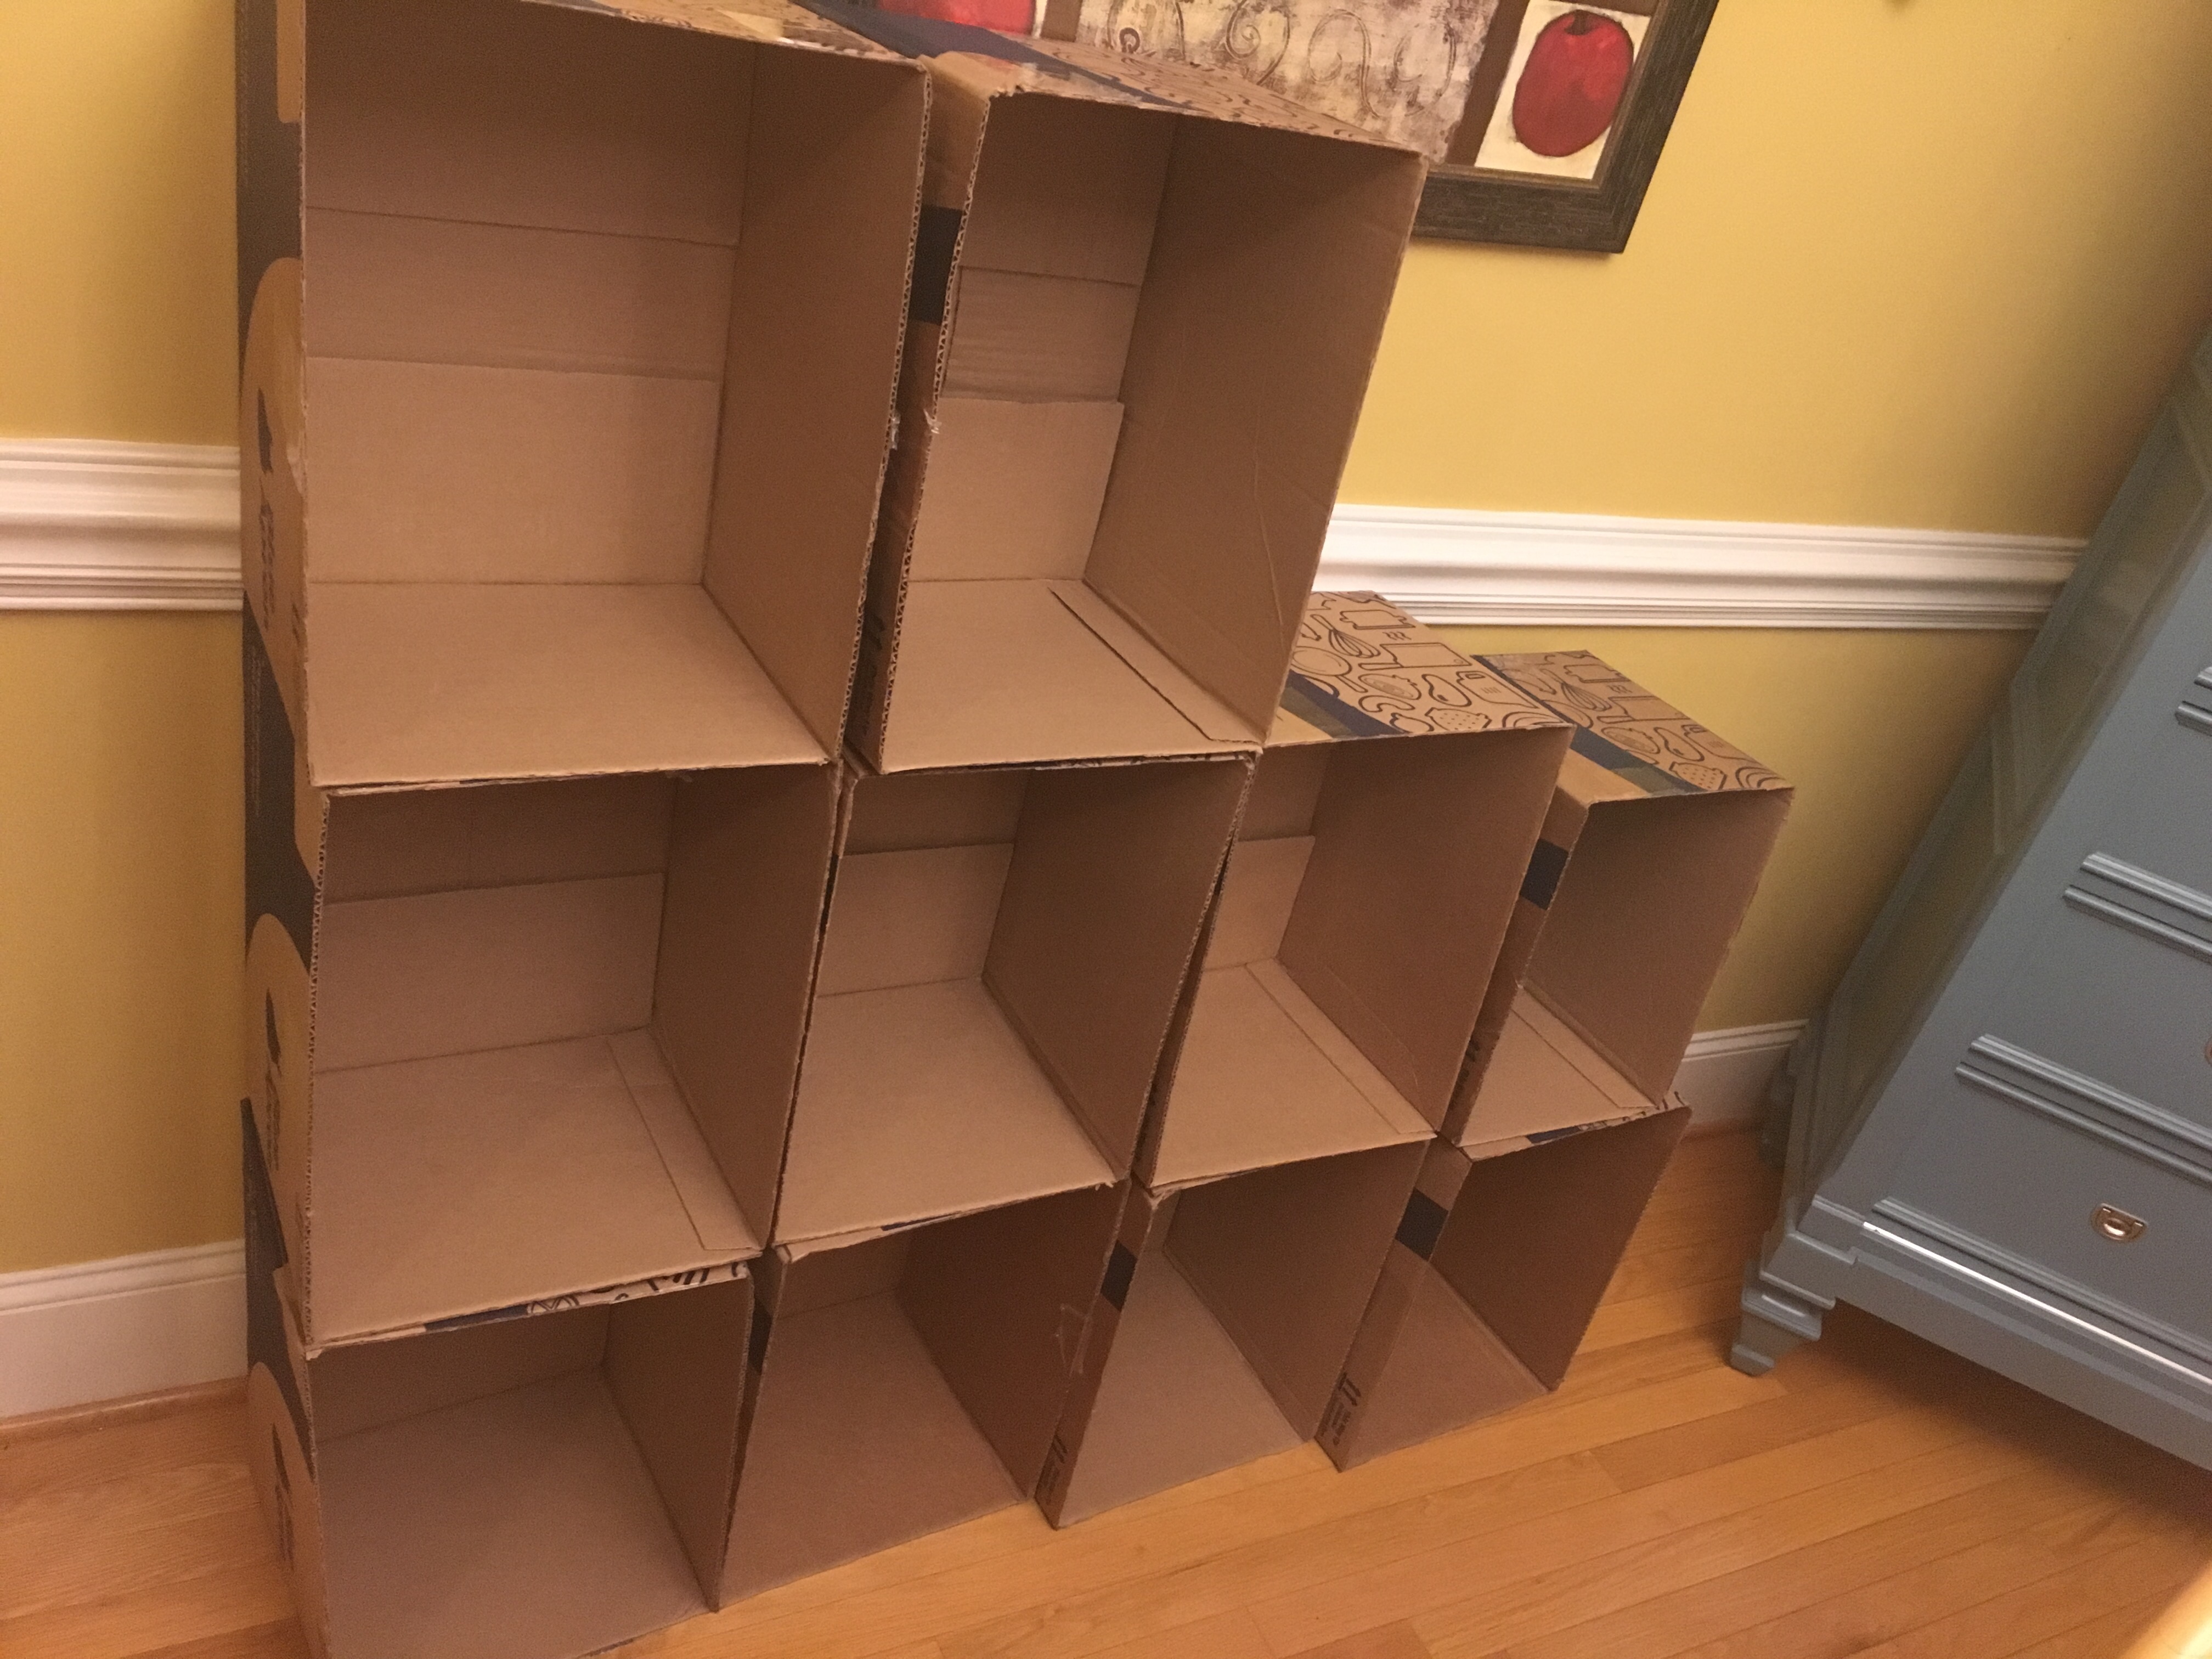 DIY Shelving from (gasp!) Cardboard Boxes?! – A Bunch of Craft